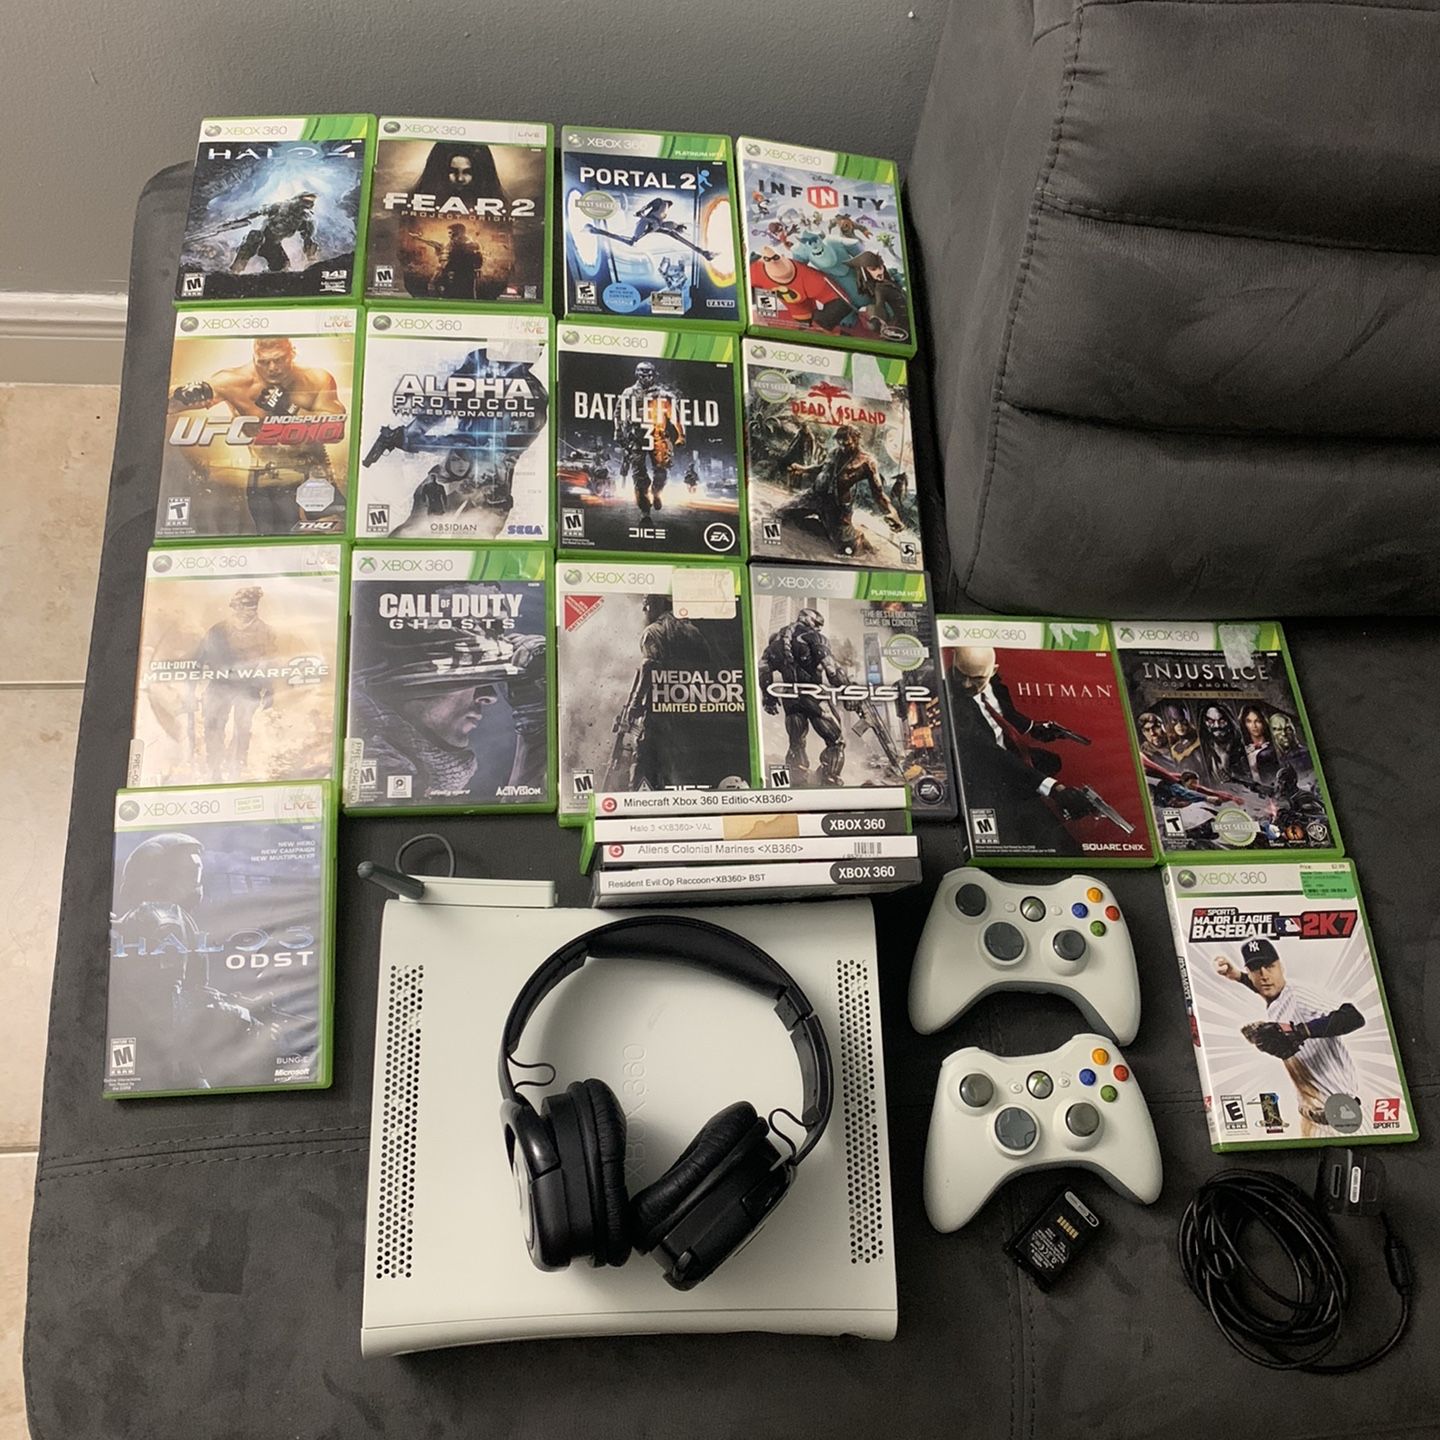 XBOX 360 /2 Controller/wireless Network Adapter/20 Games